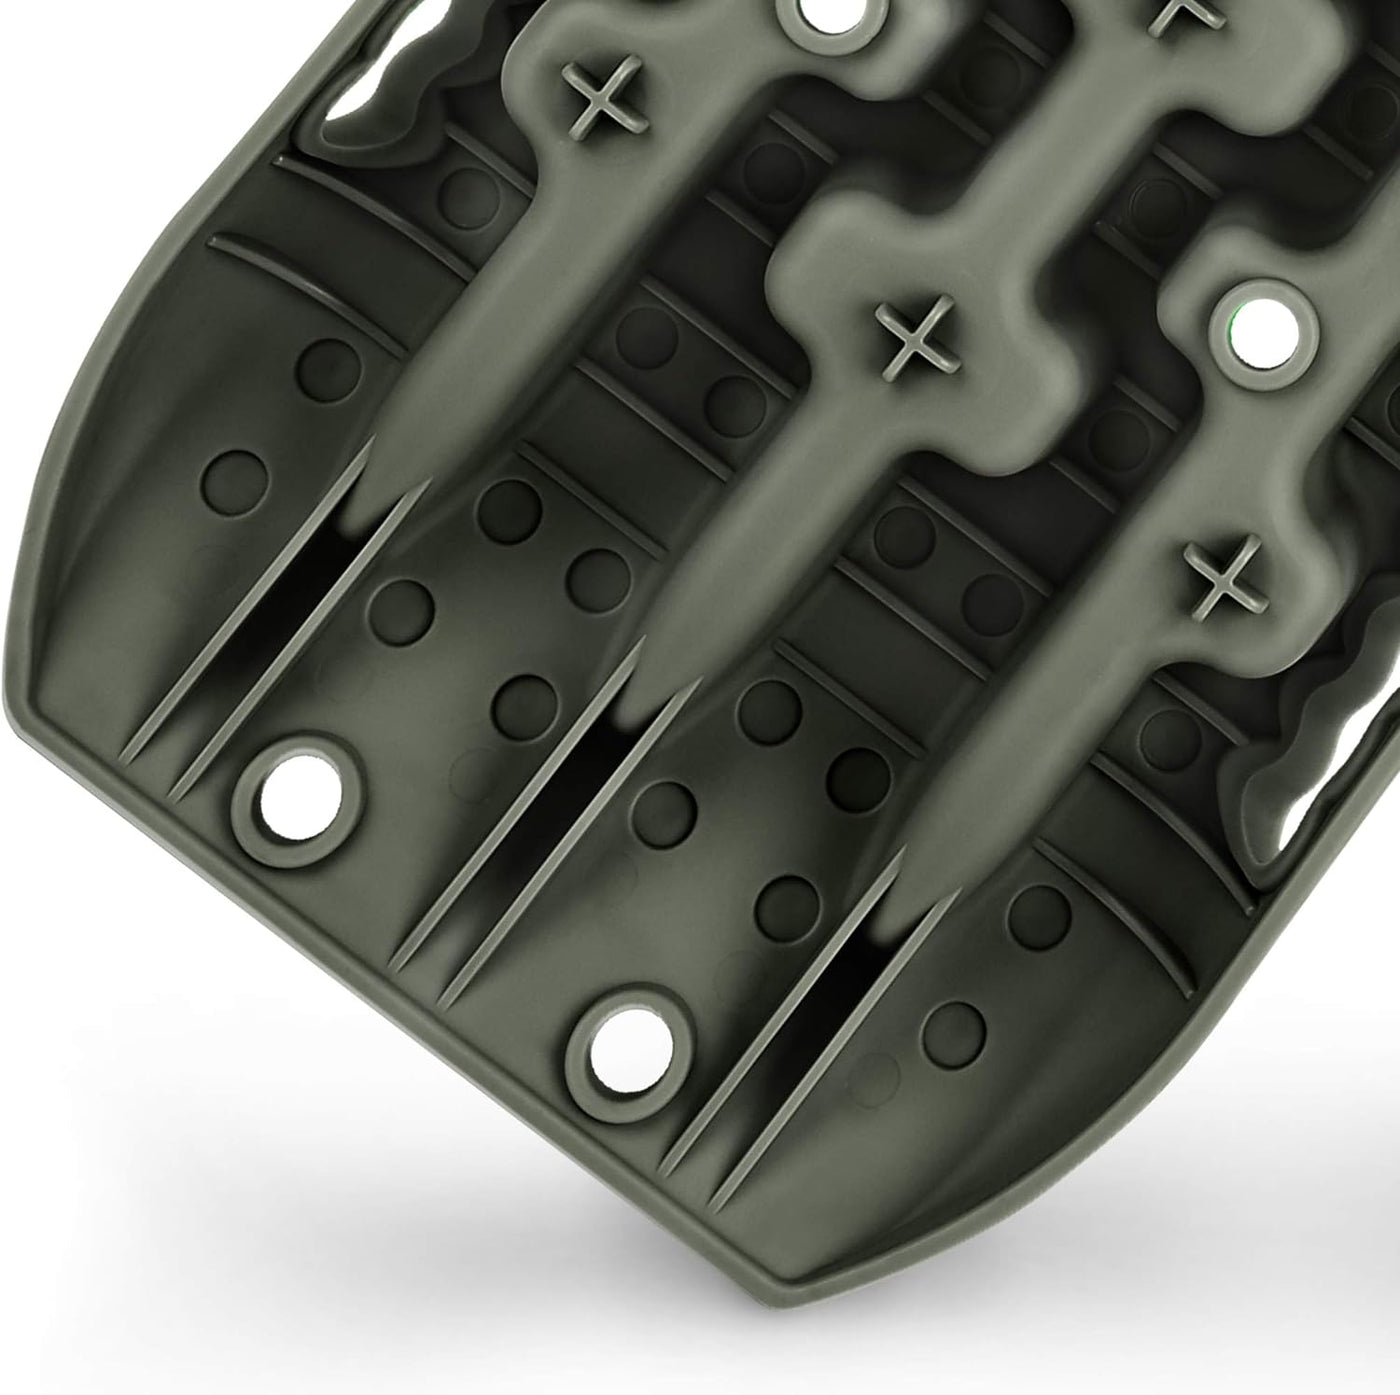 X-BULL New Recovery Traction Tracks Tire Ladder for Sand Snow Mud 4WD(Olive) - $40